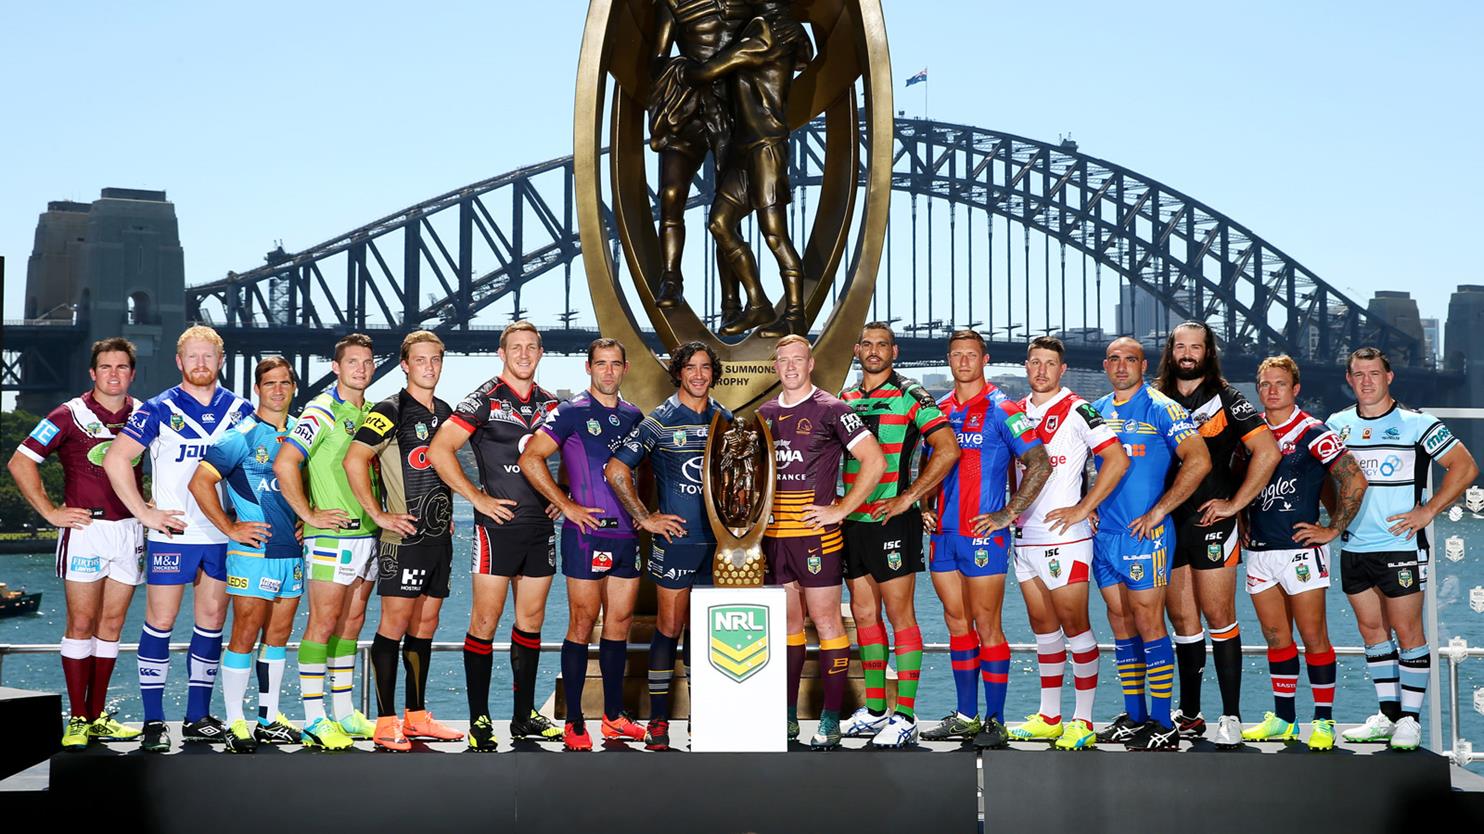 Nrl Captains Greenroom Digital — Digital Marketing For The Sports And Entertainment Industry 2235